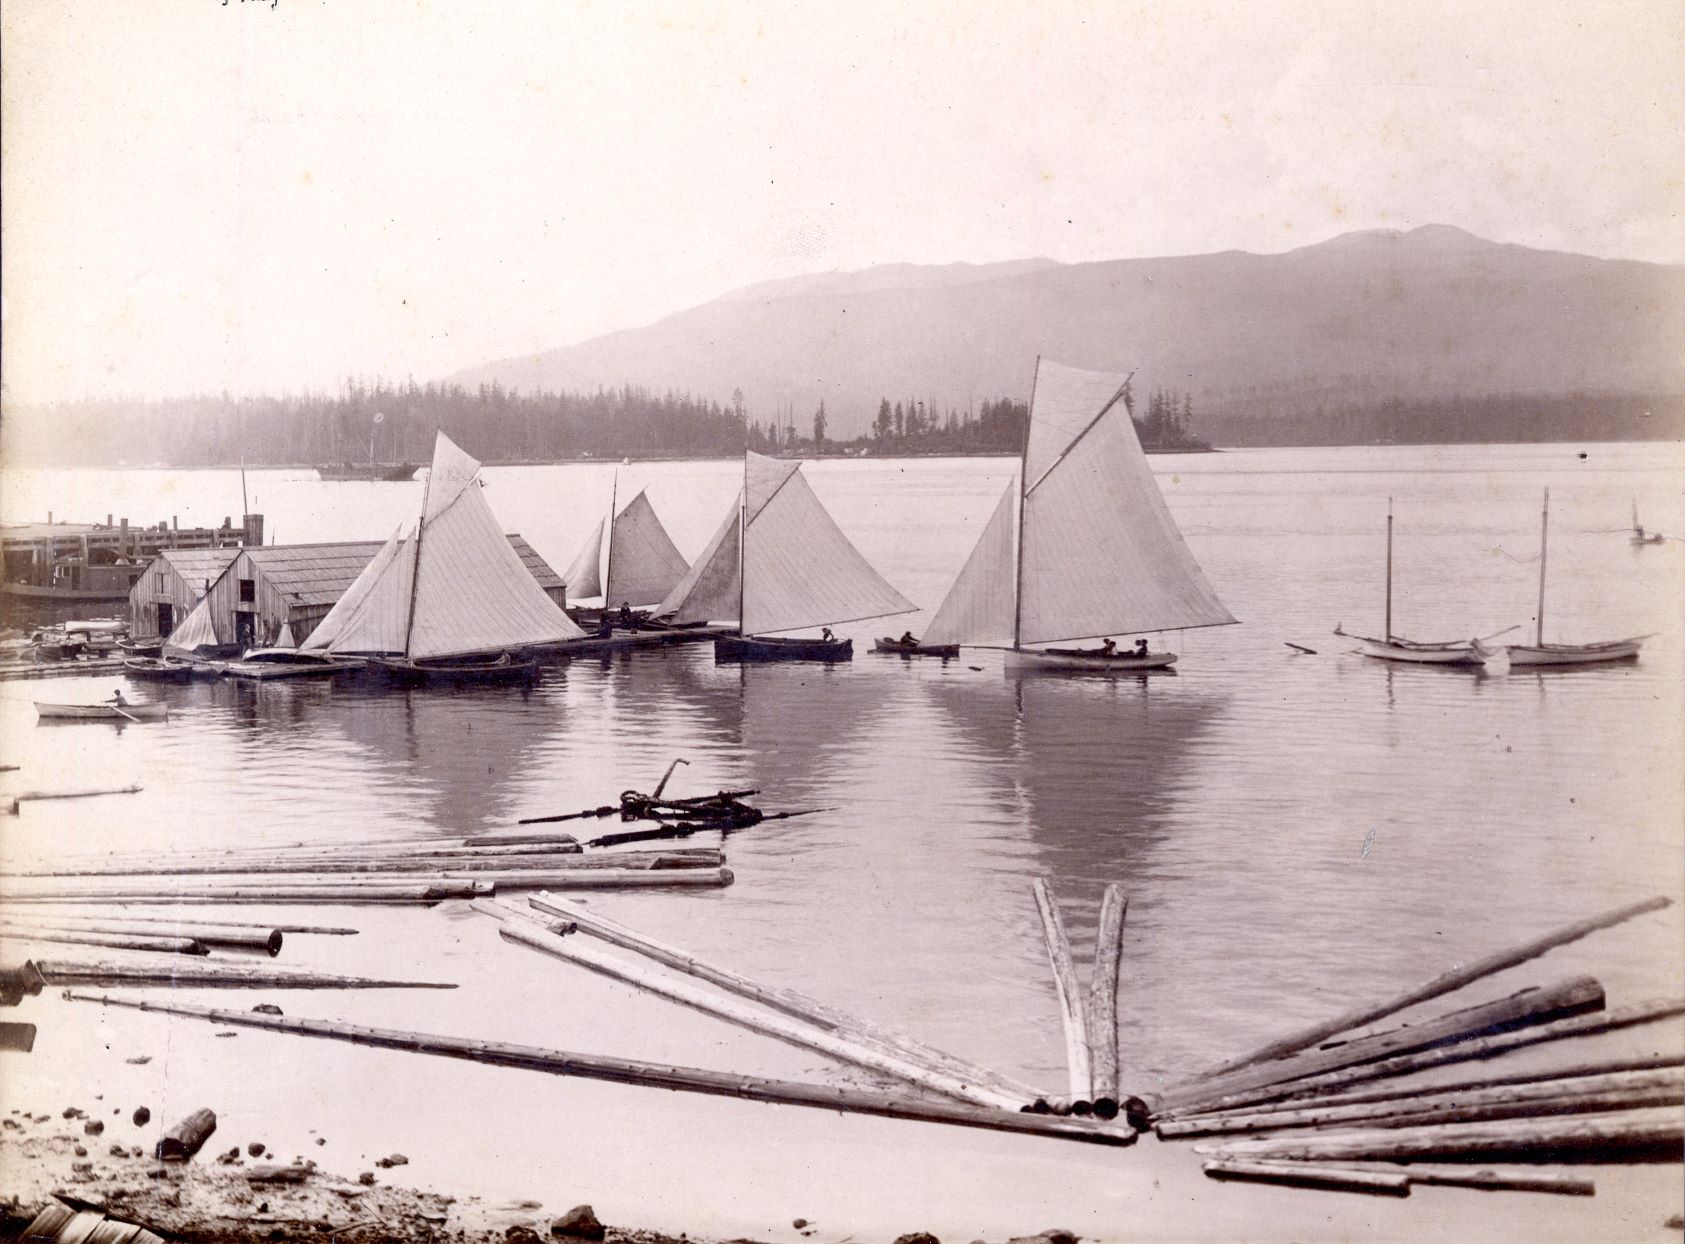 A photo depicting sailing vessels at City Wharf and Linton Boathouse in Vancouver, British Columbia.